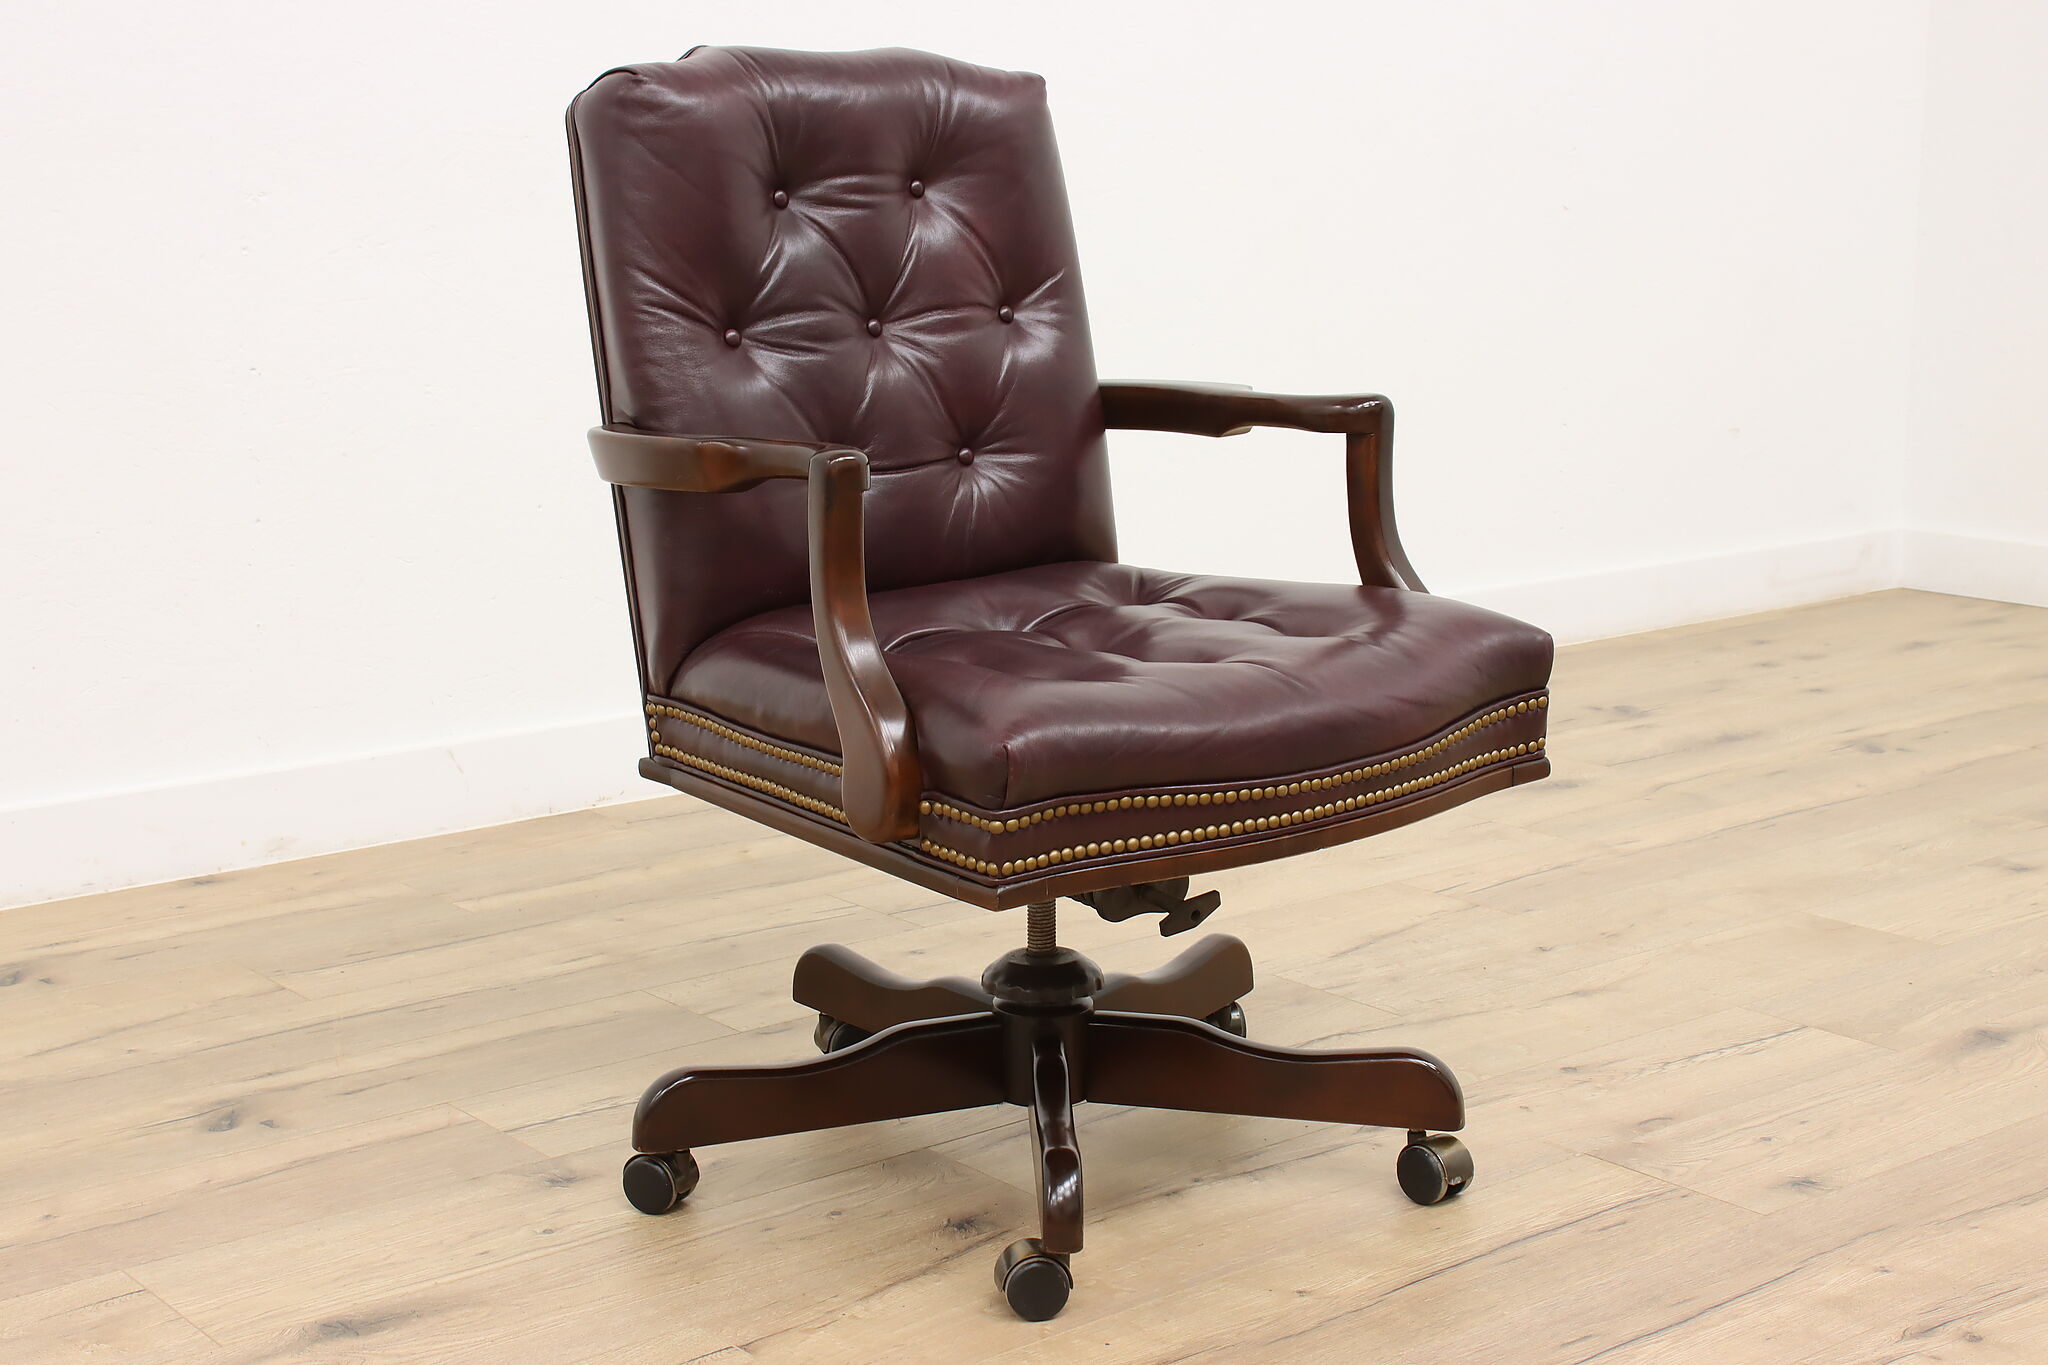 Traditional Vintage Tufted Leather Swivel Adjustable Desk Chair, Century